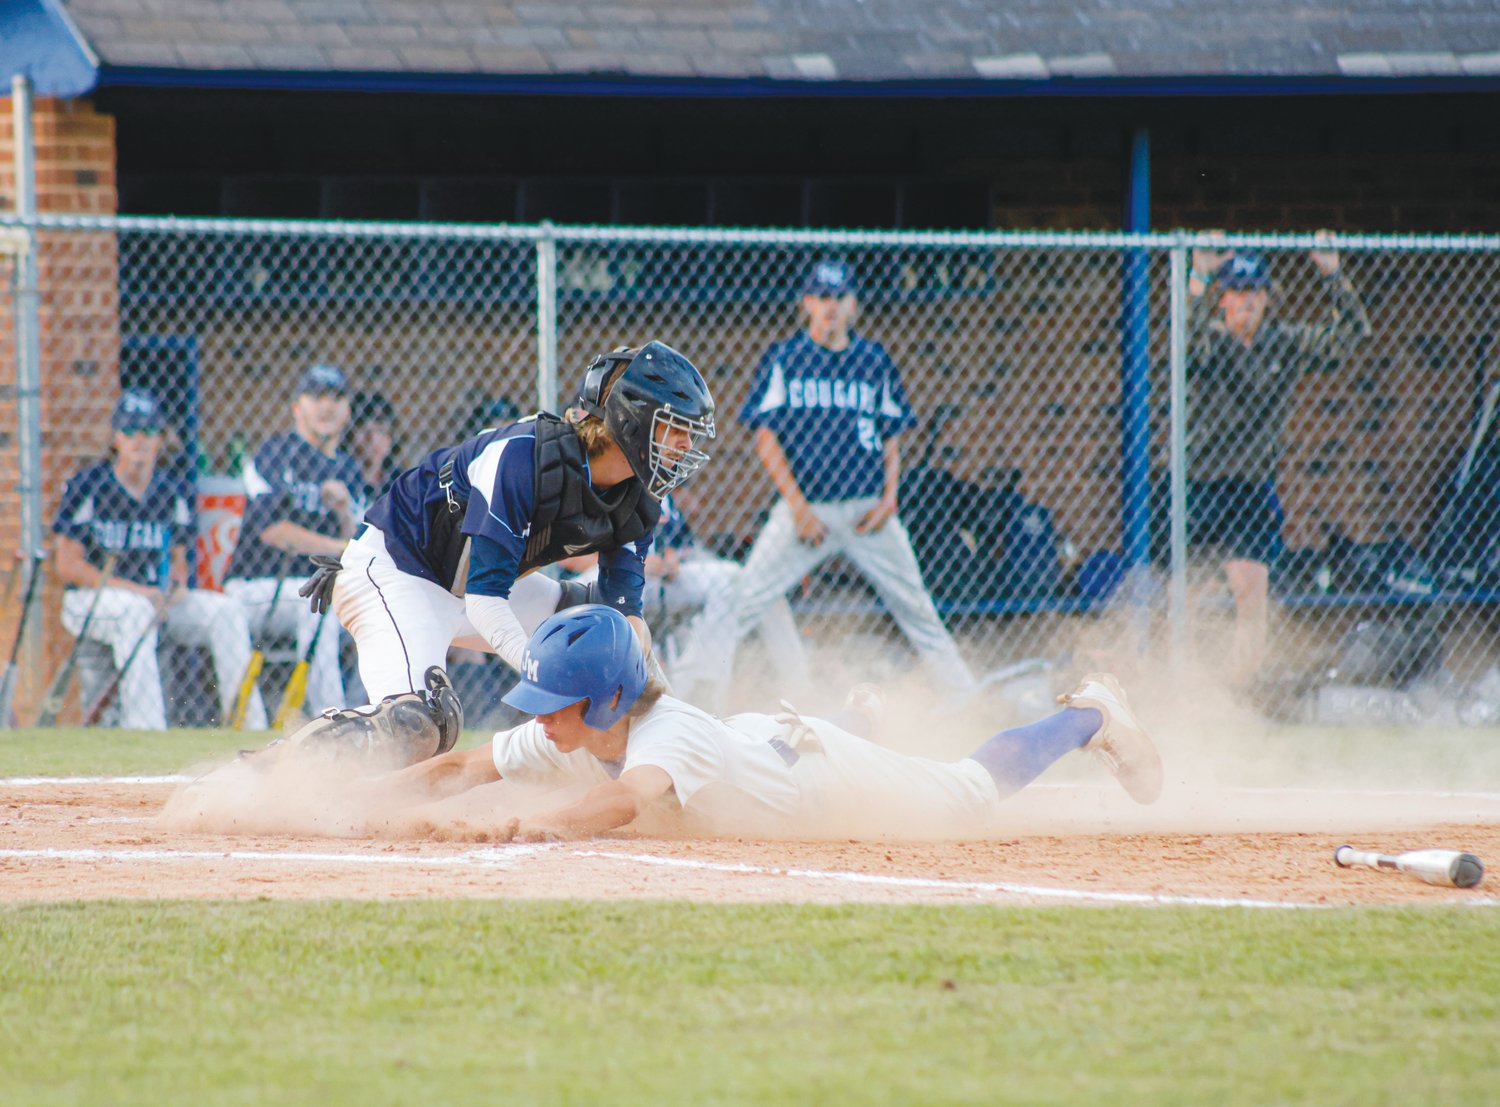 Jordan-Matthews [identify baserunner] (in white) slides across home plate in the Jets' 3-1 first-round win over the Southwest Edgecombe Cougars on May 10.